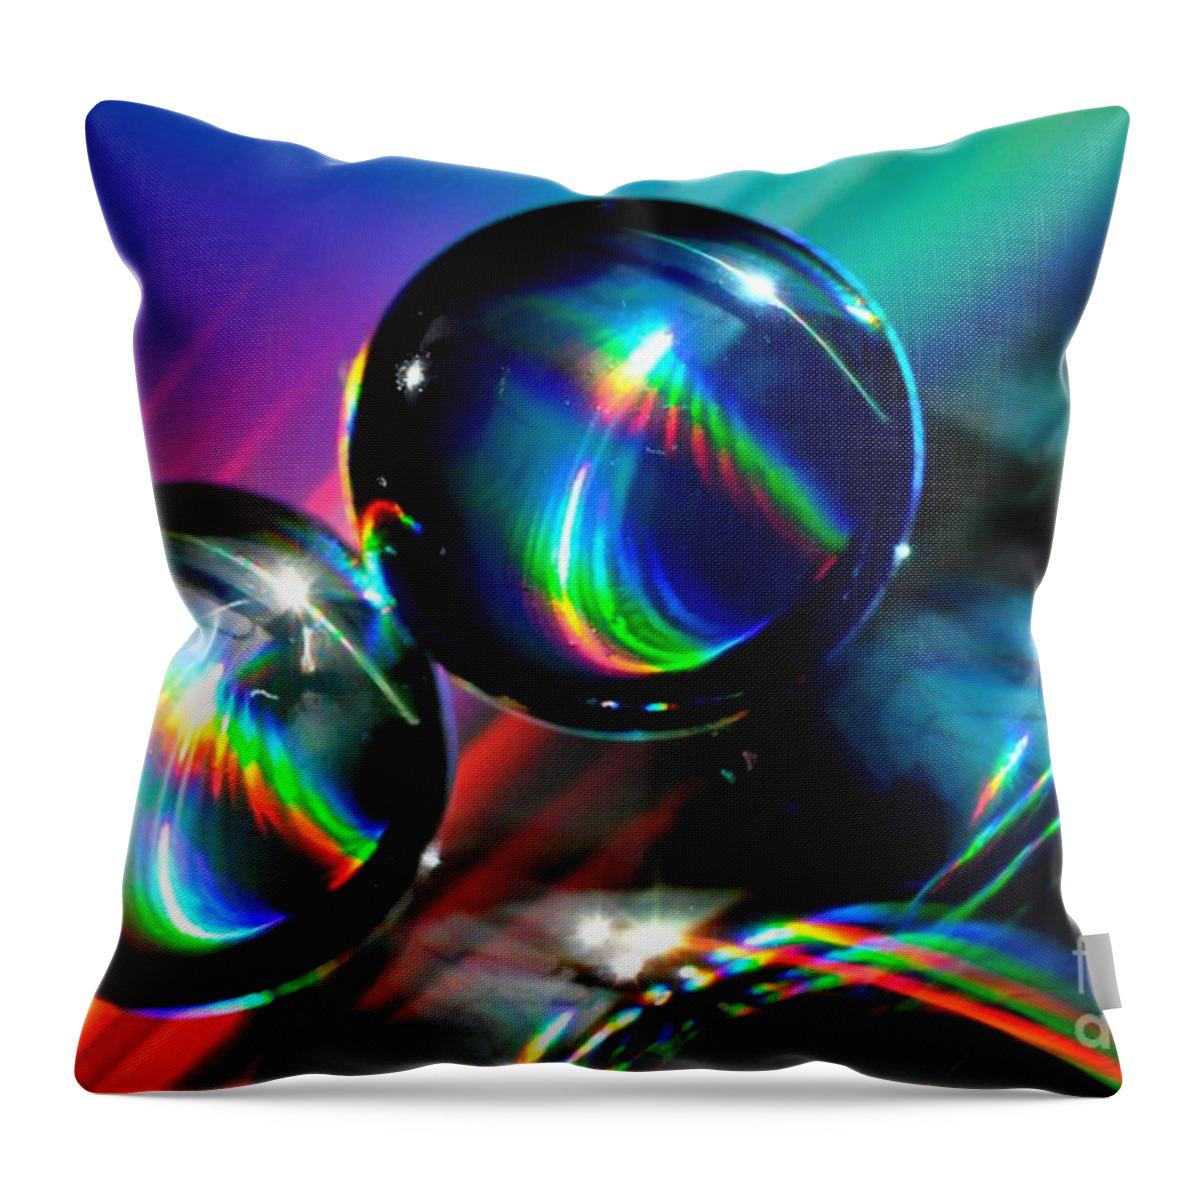 Spheres Throw Pillow featuring the photograph Spheres by Sylvie Leandre